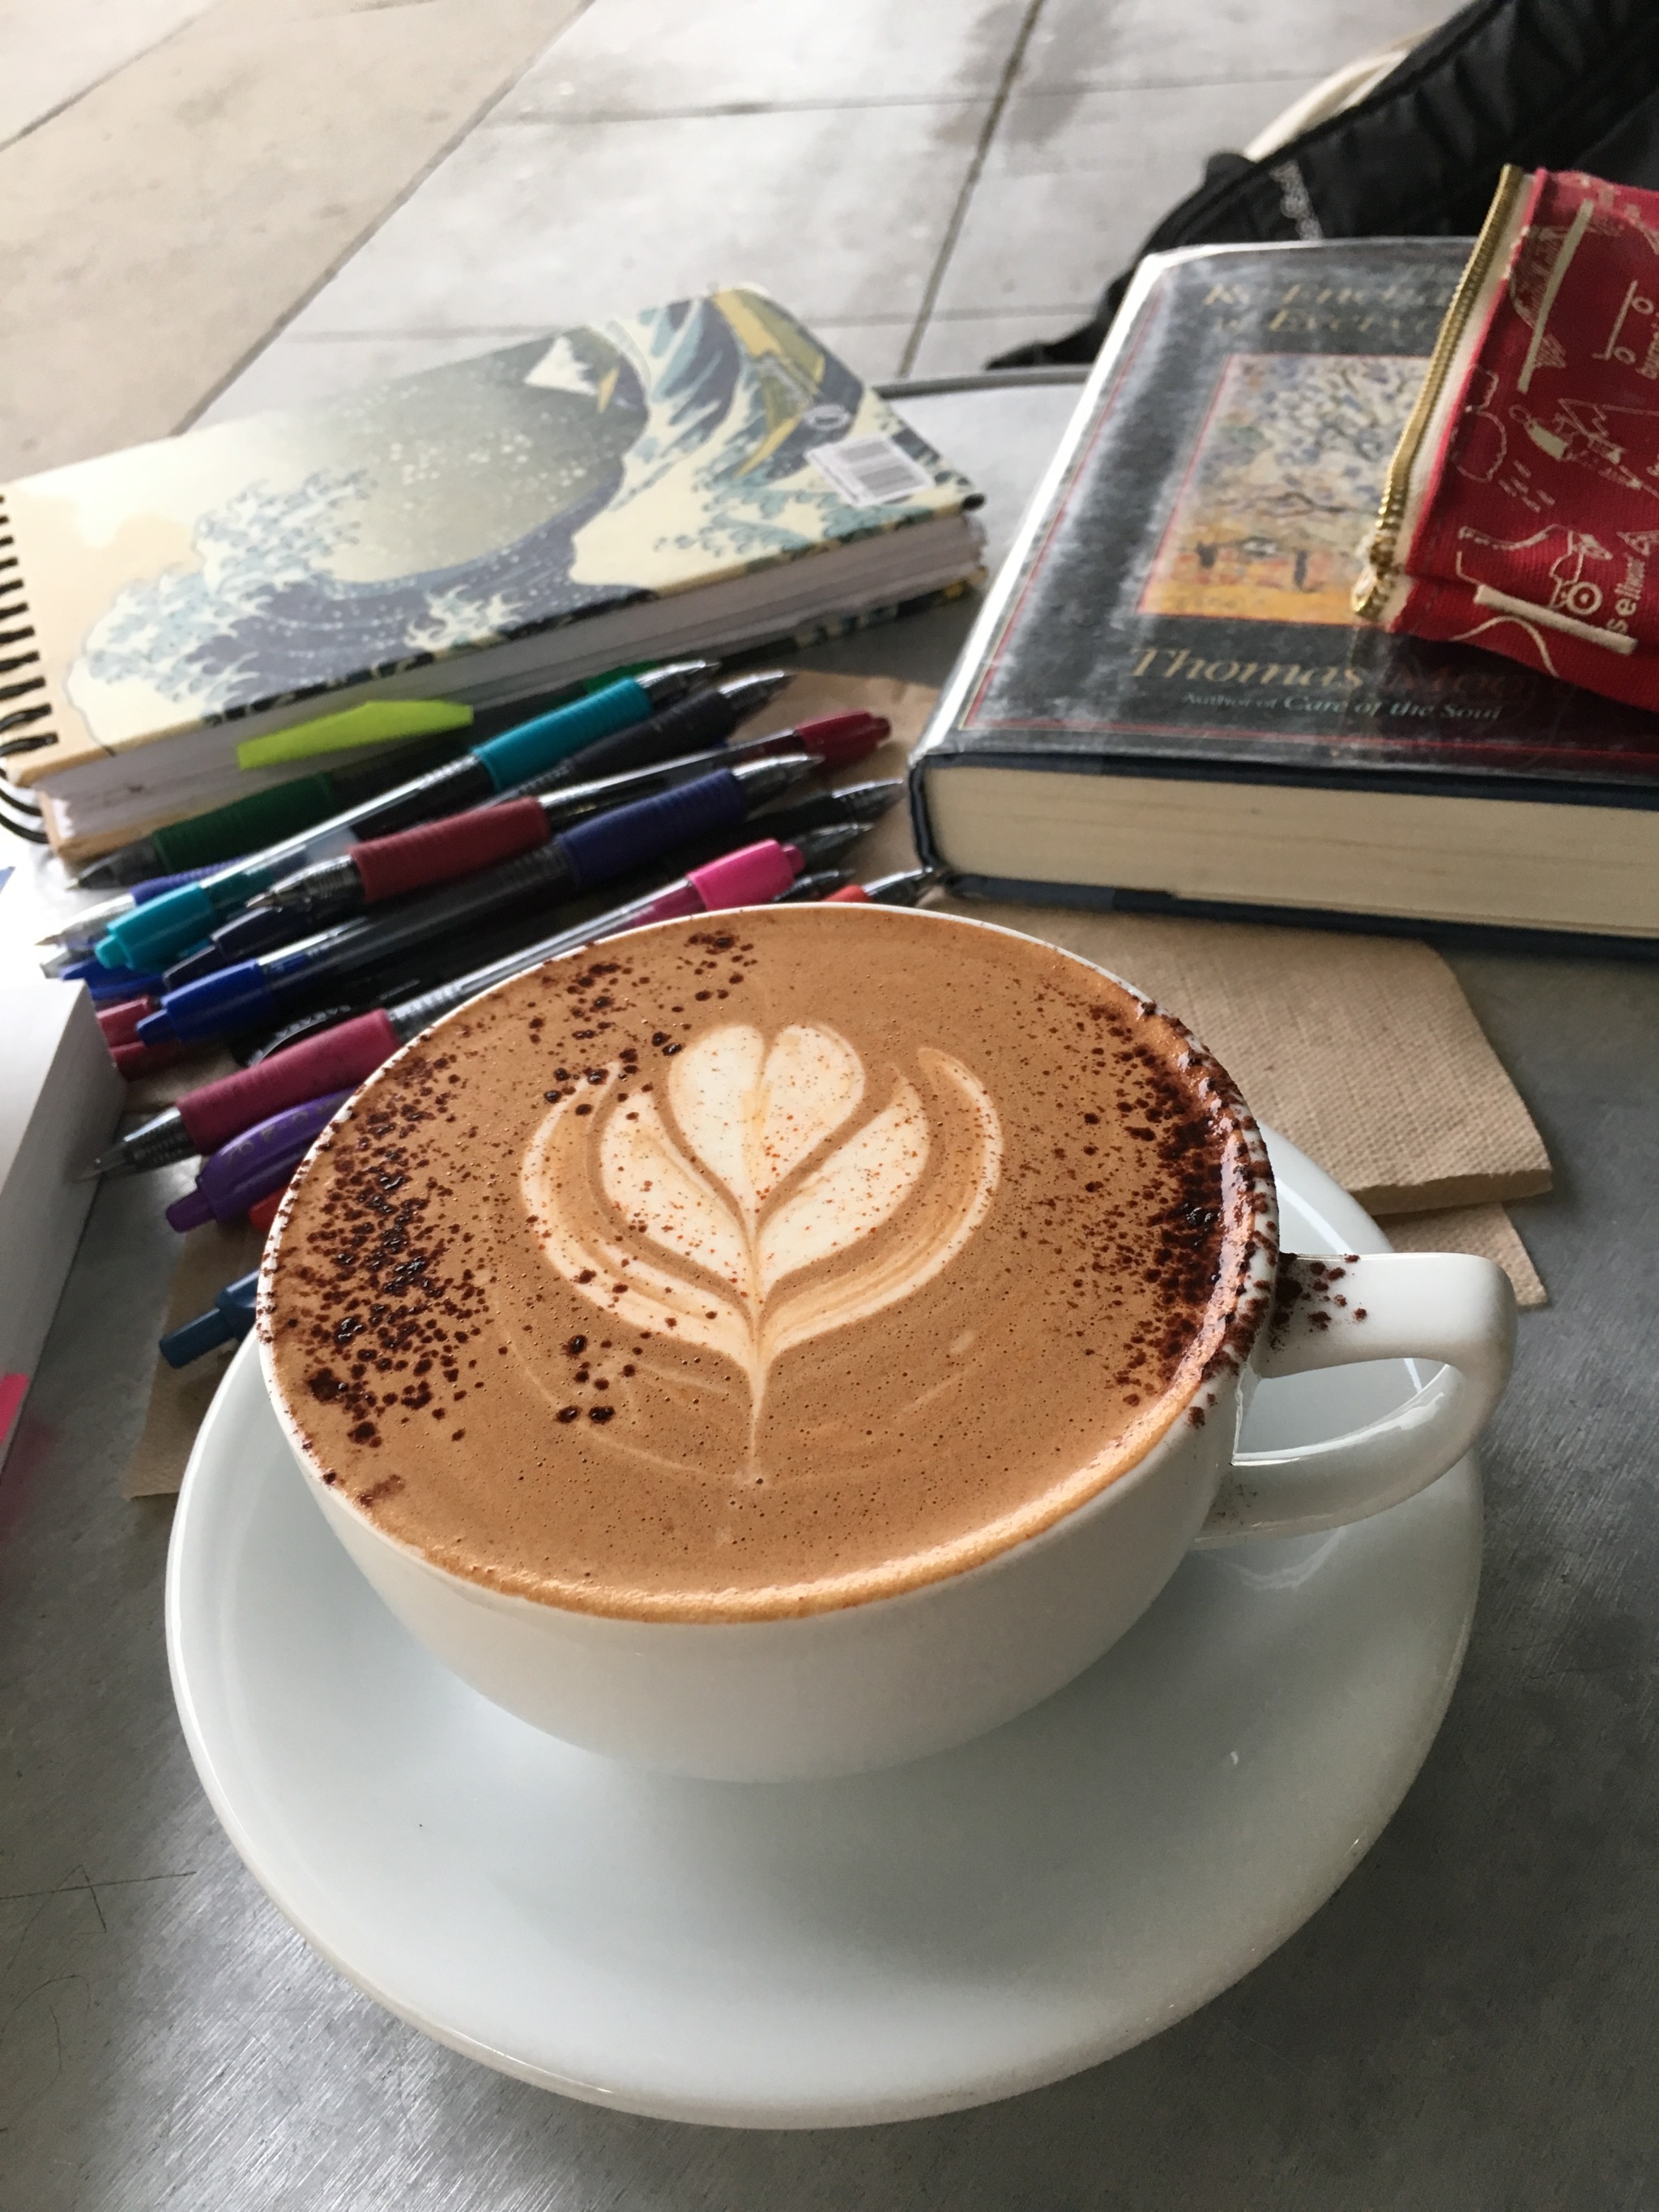 LATTE ART PEN: your ally to amaze with a cappuccino. Discover the